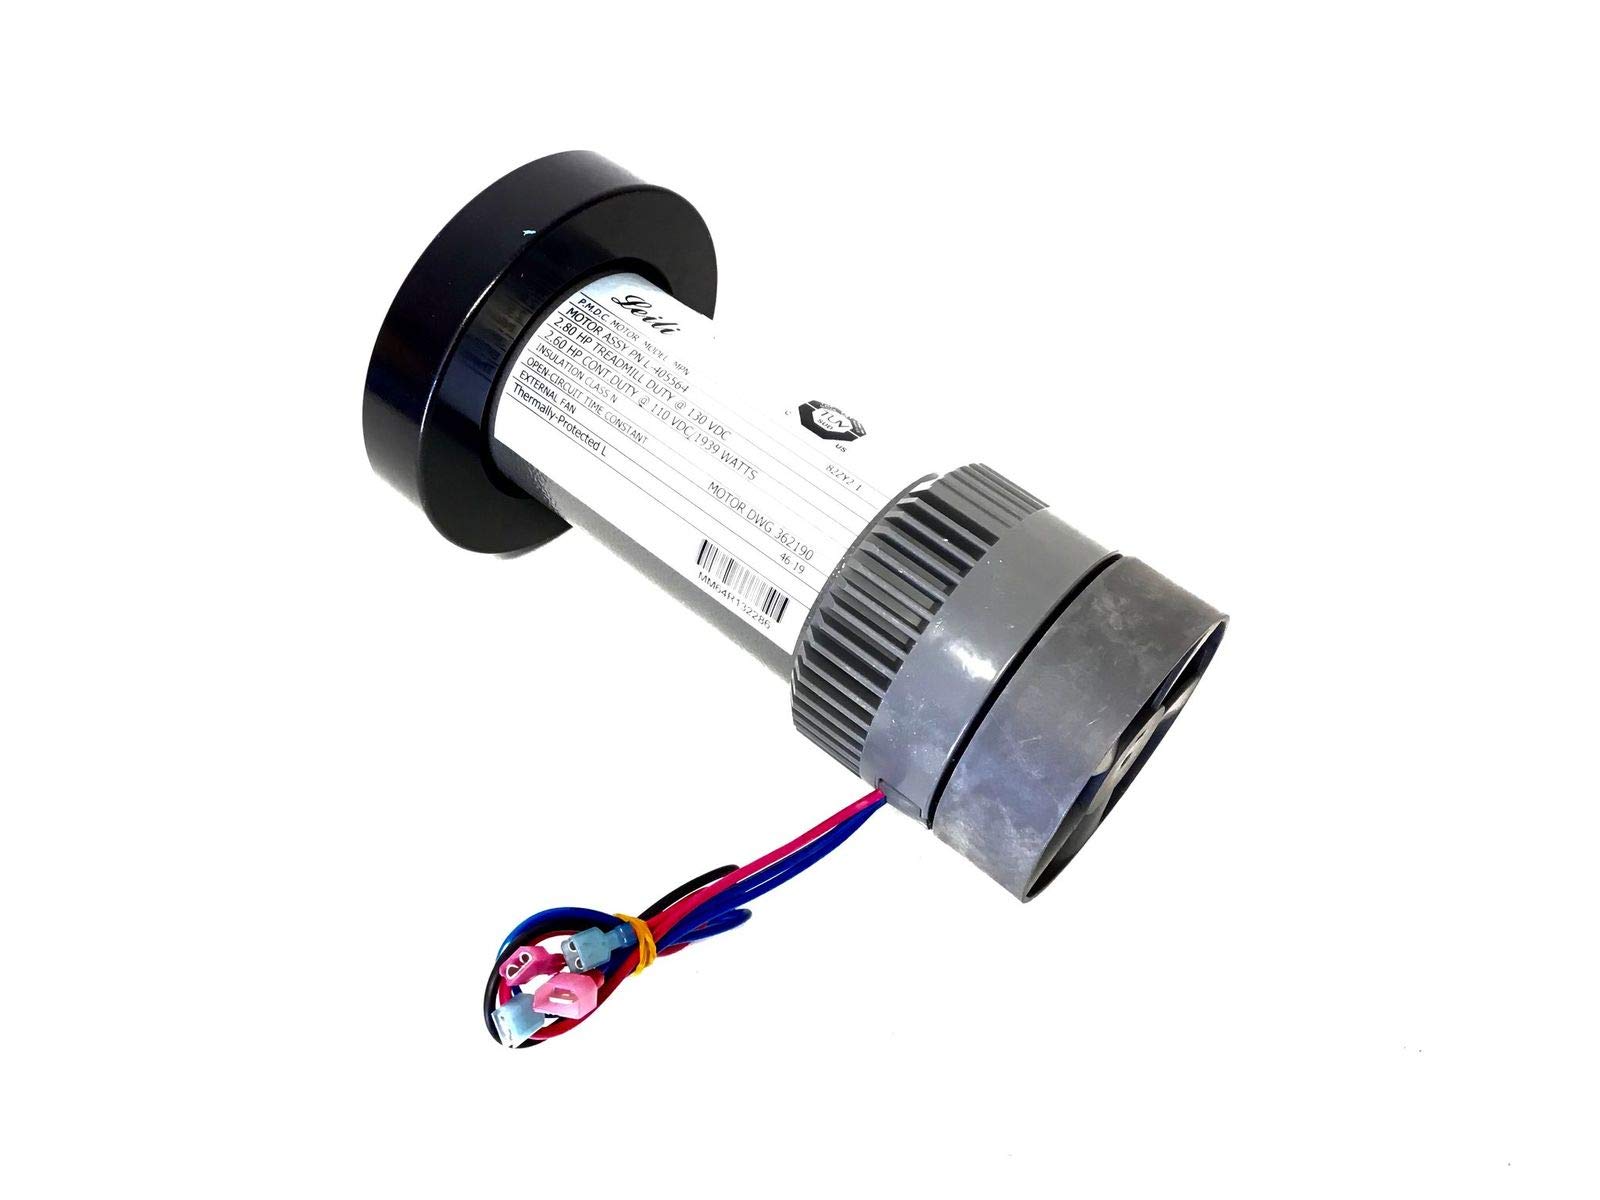 Icon Health & Fitness, Inc. Dc Drive Motor 82ZY2-1 L-405564 405625 Works W NordicTrack T 6.7 S 525 cT 500 Treadmill